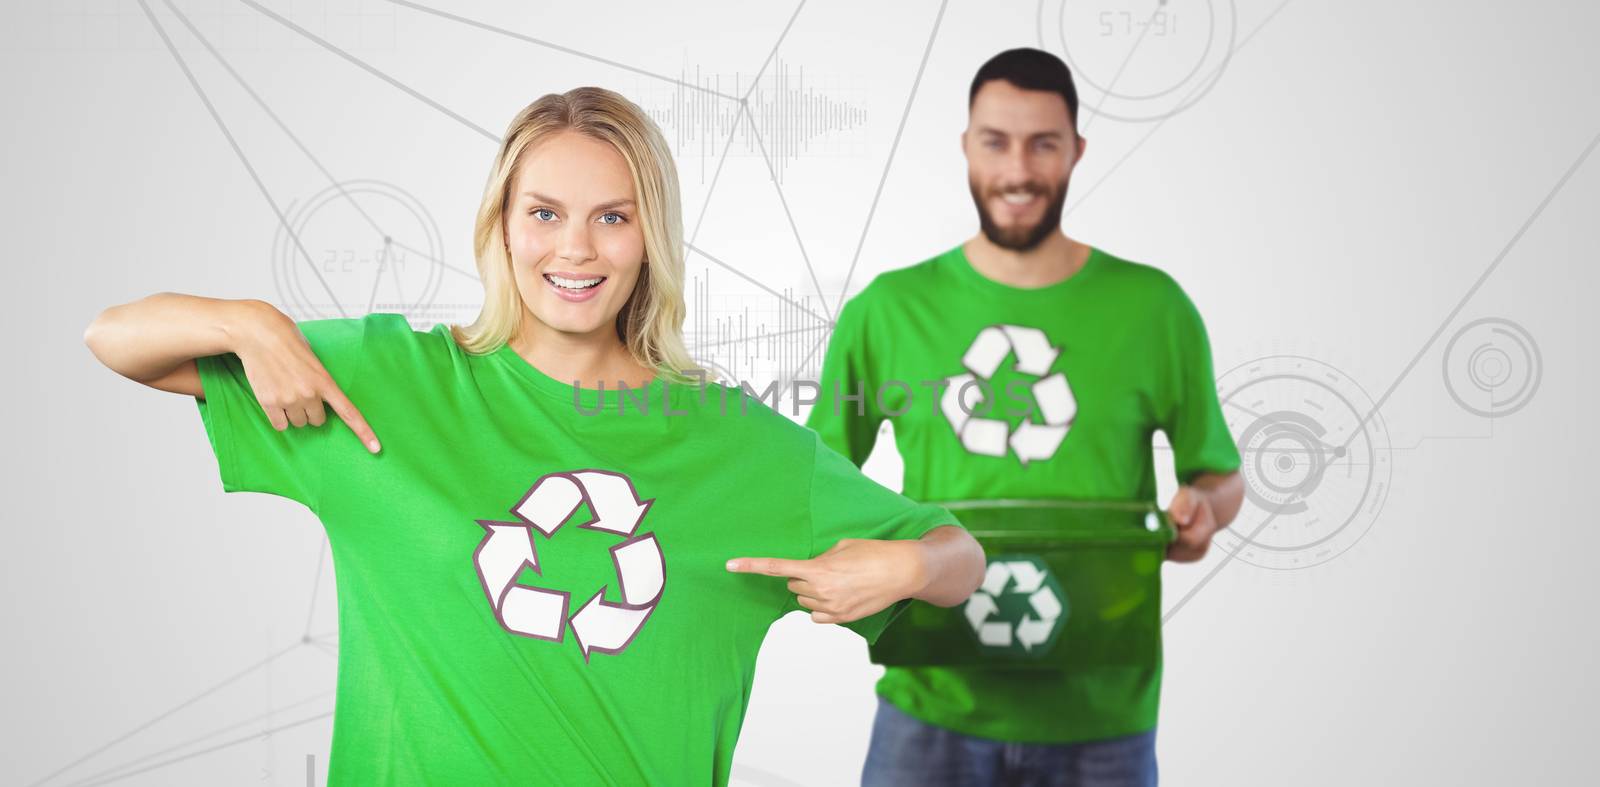 Composite image of portrait of woman pointing towards recycling symbol on tshirts  by Wavebreakmedia